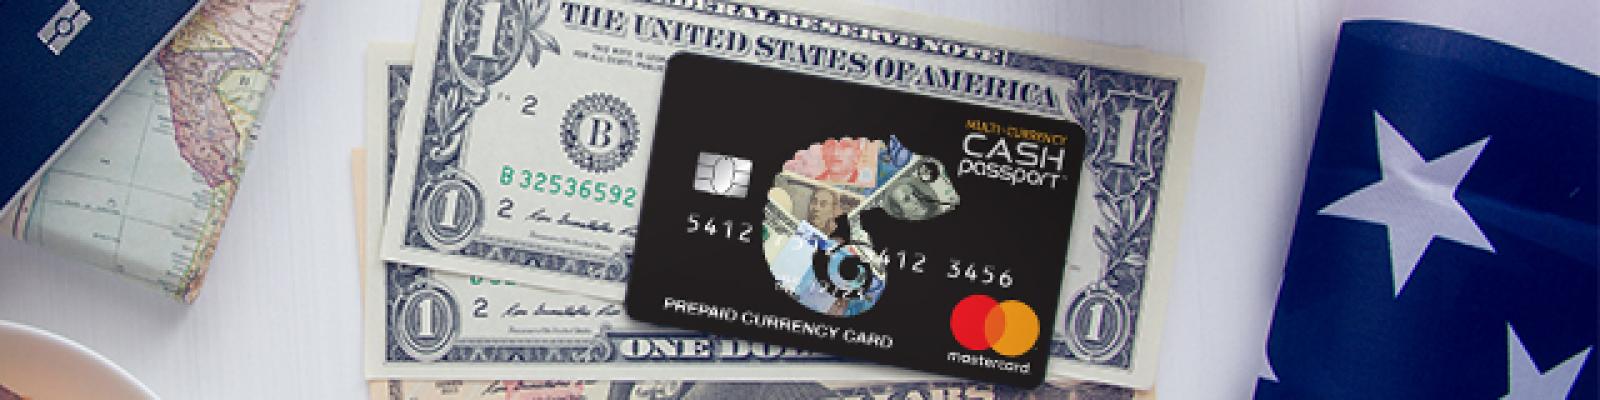 United States Currency with travel money card